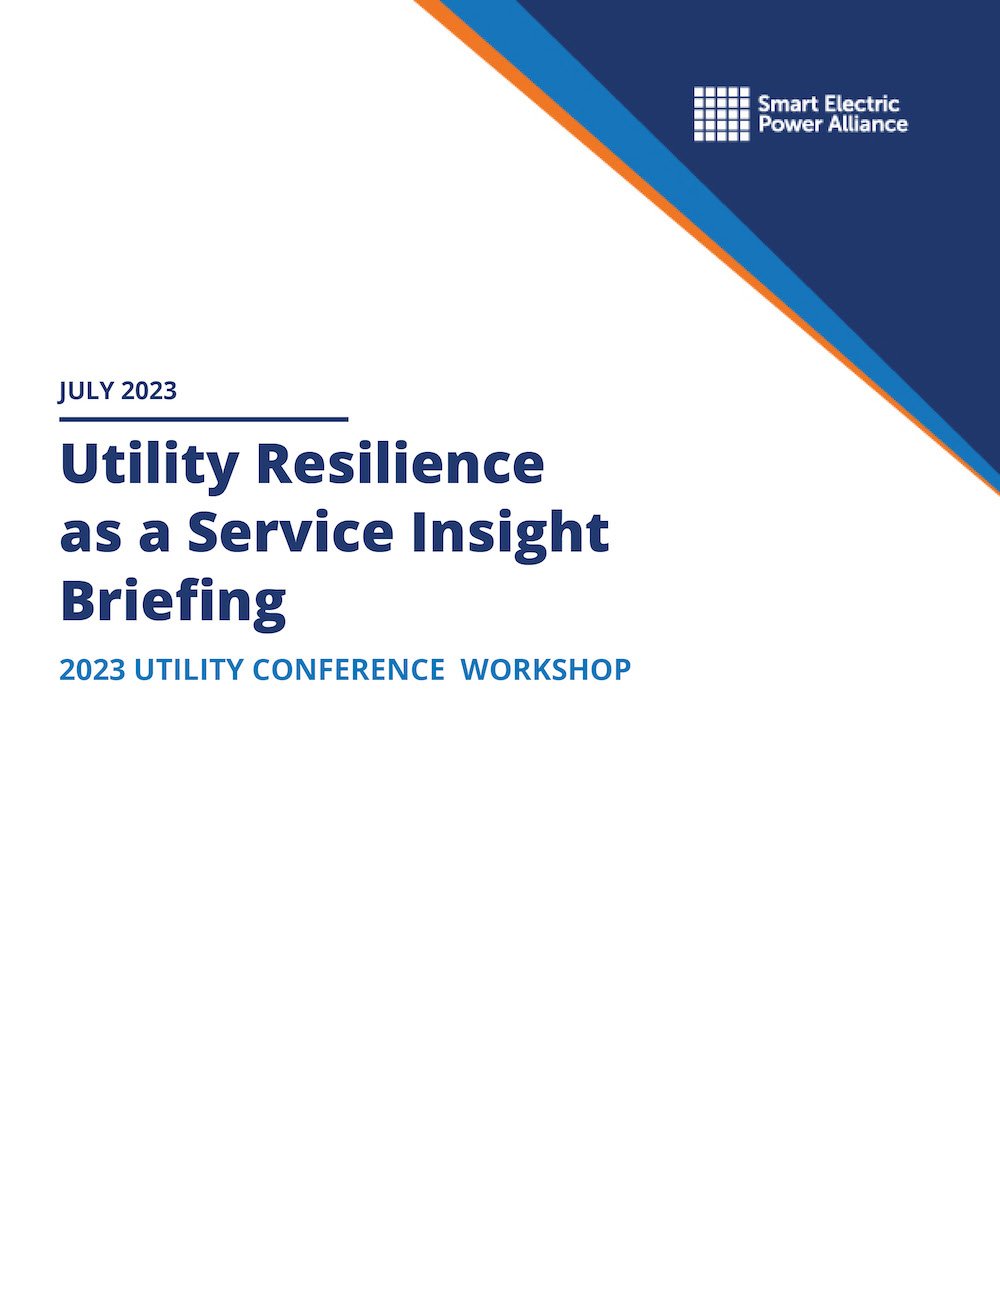 Utility Resilience as a Service Workshop Briefing